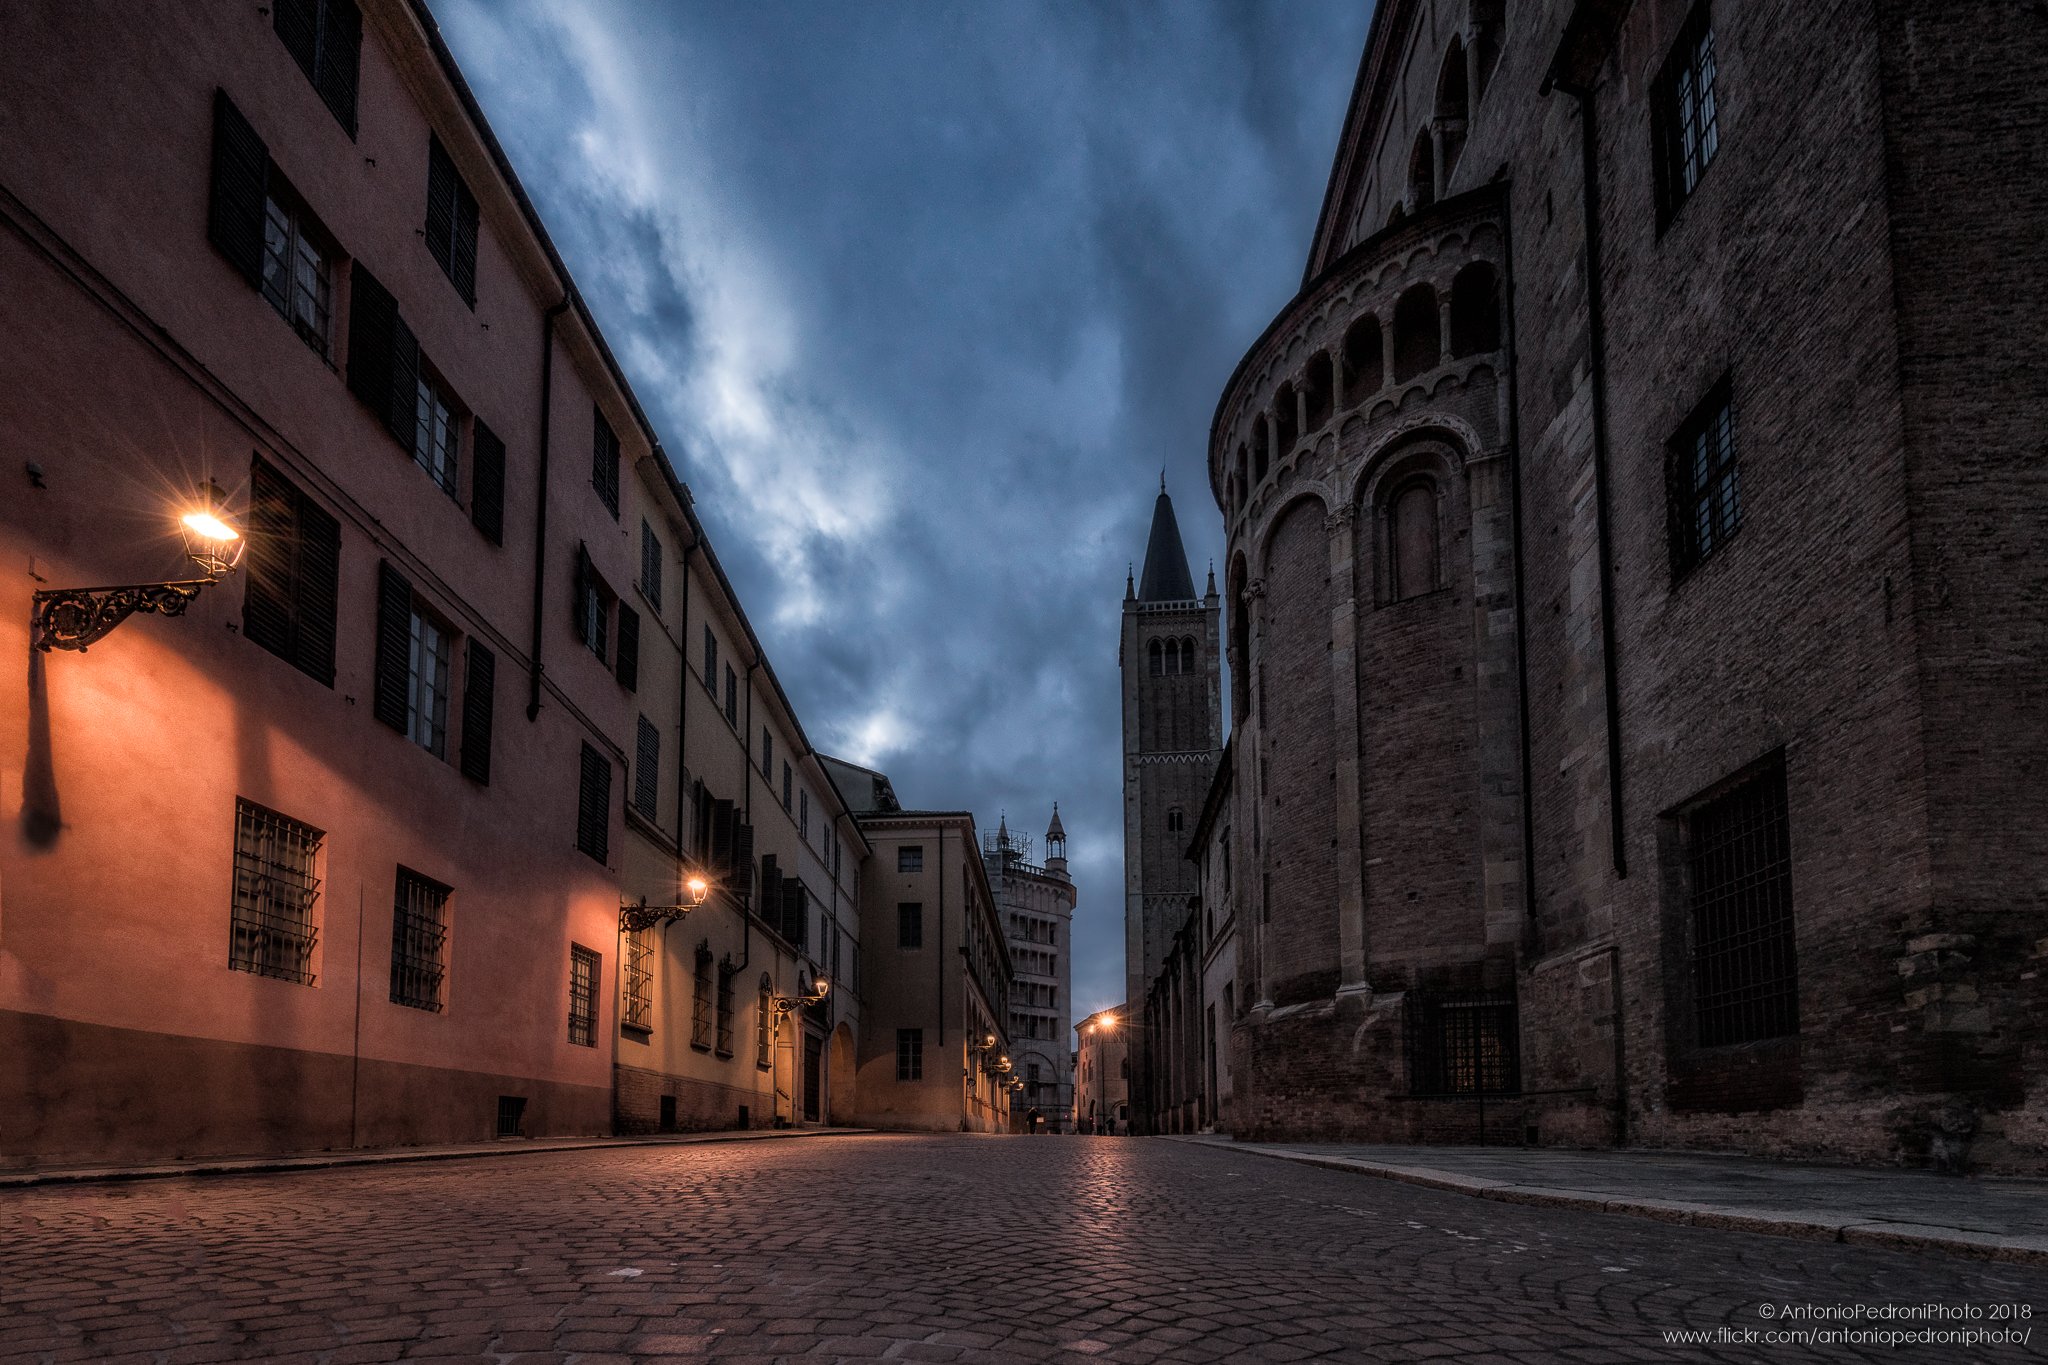 Parma, Italy, city, town, light, street, road, church, cathedral, night, evening, Antonio Pedroni